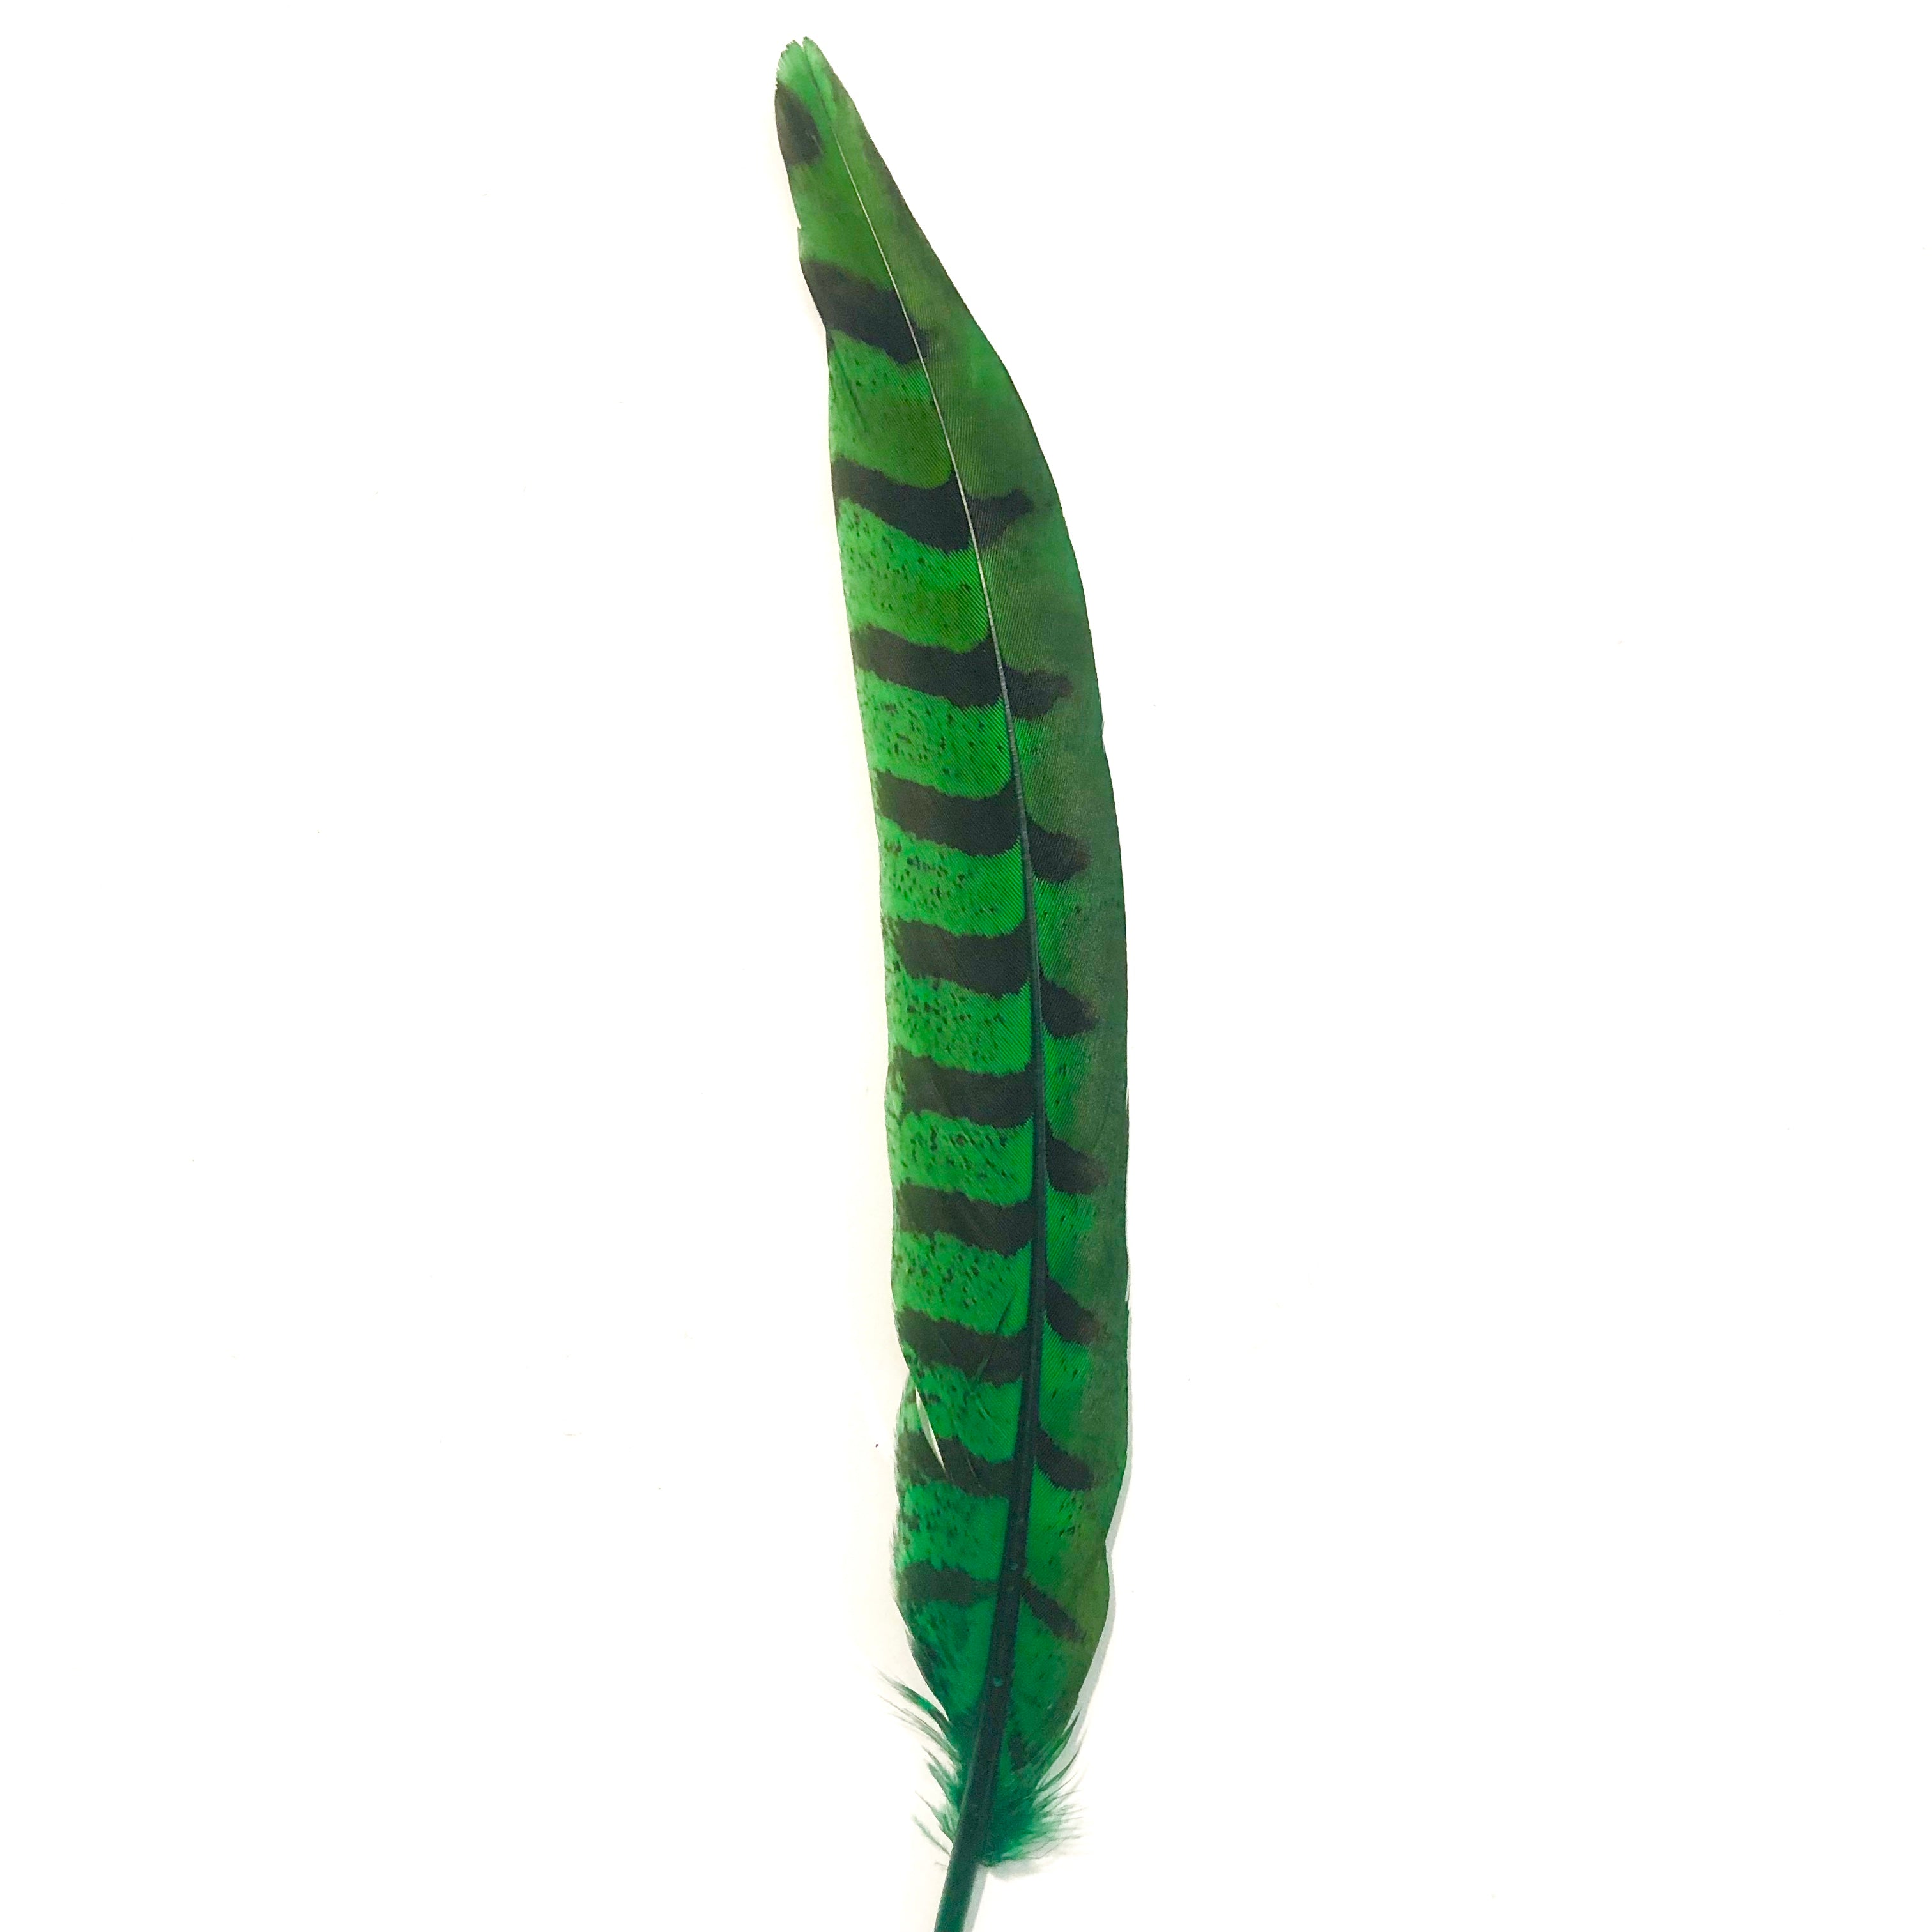 12" to 14" Reeves Pheasant Tail Feather - Green ((SECONDS))